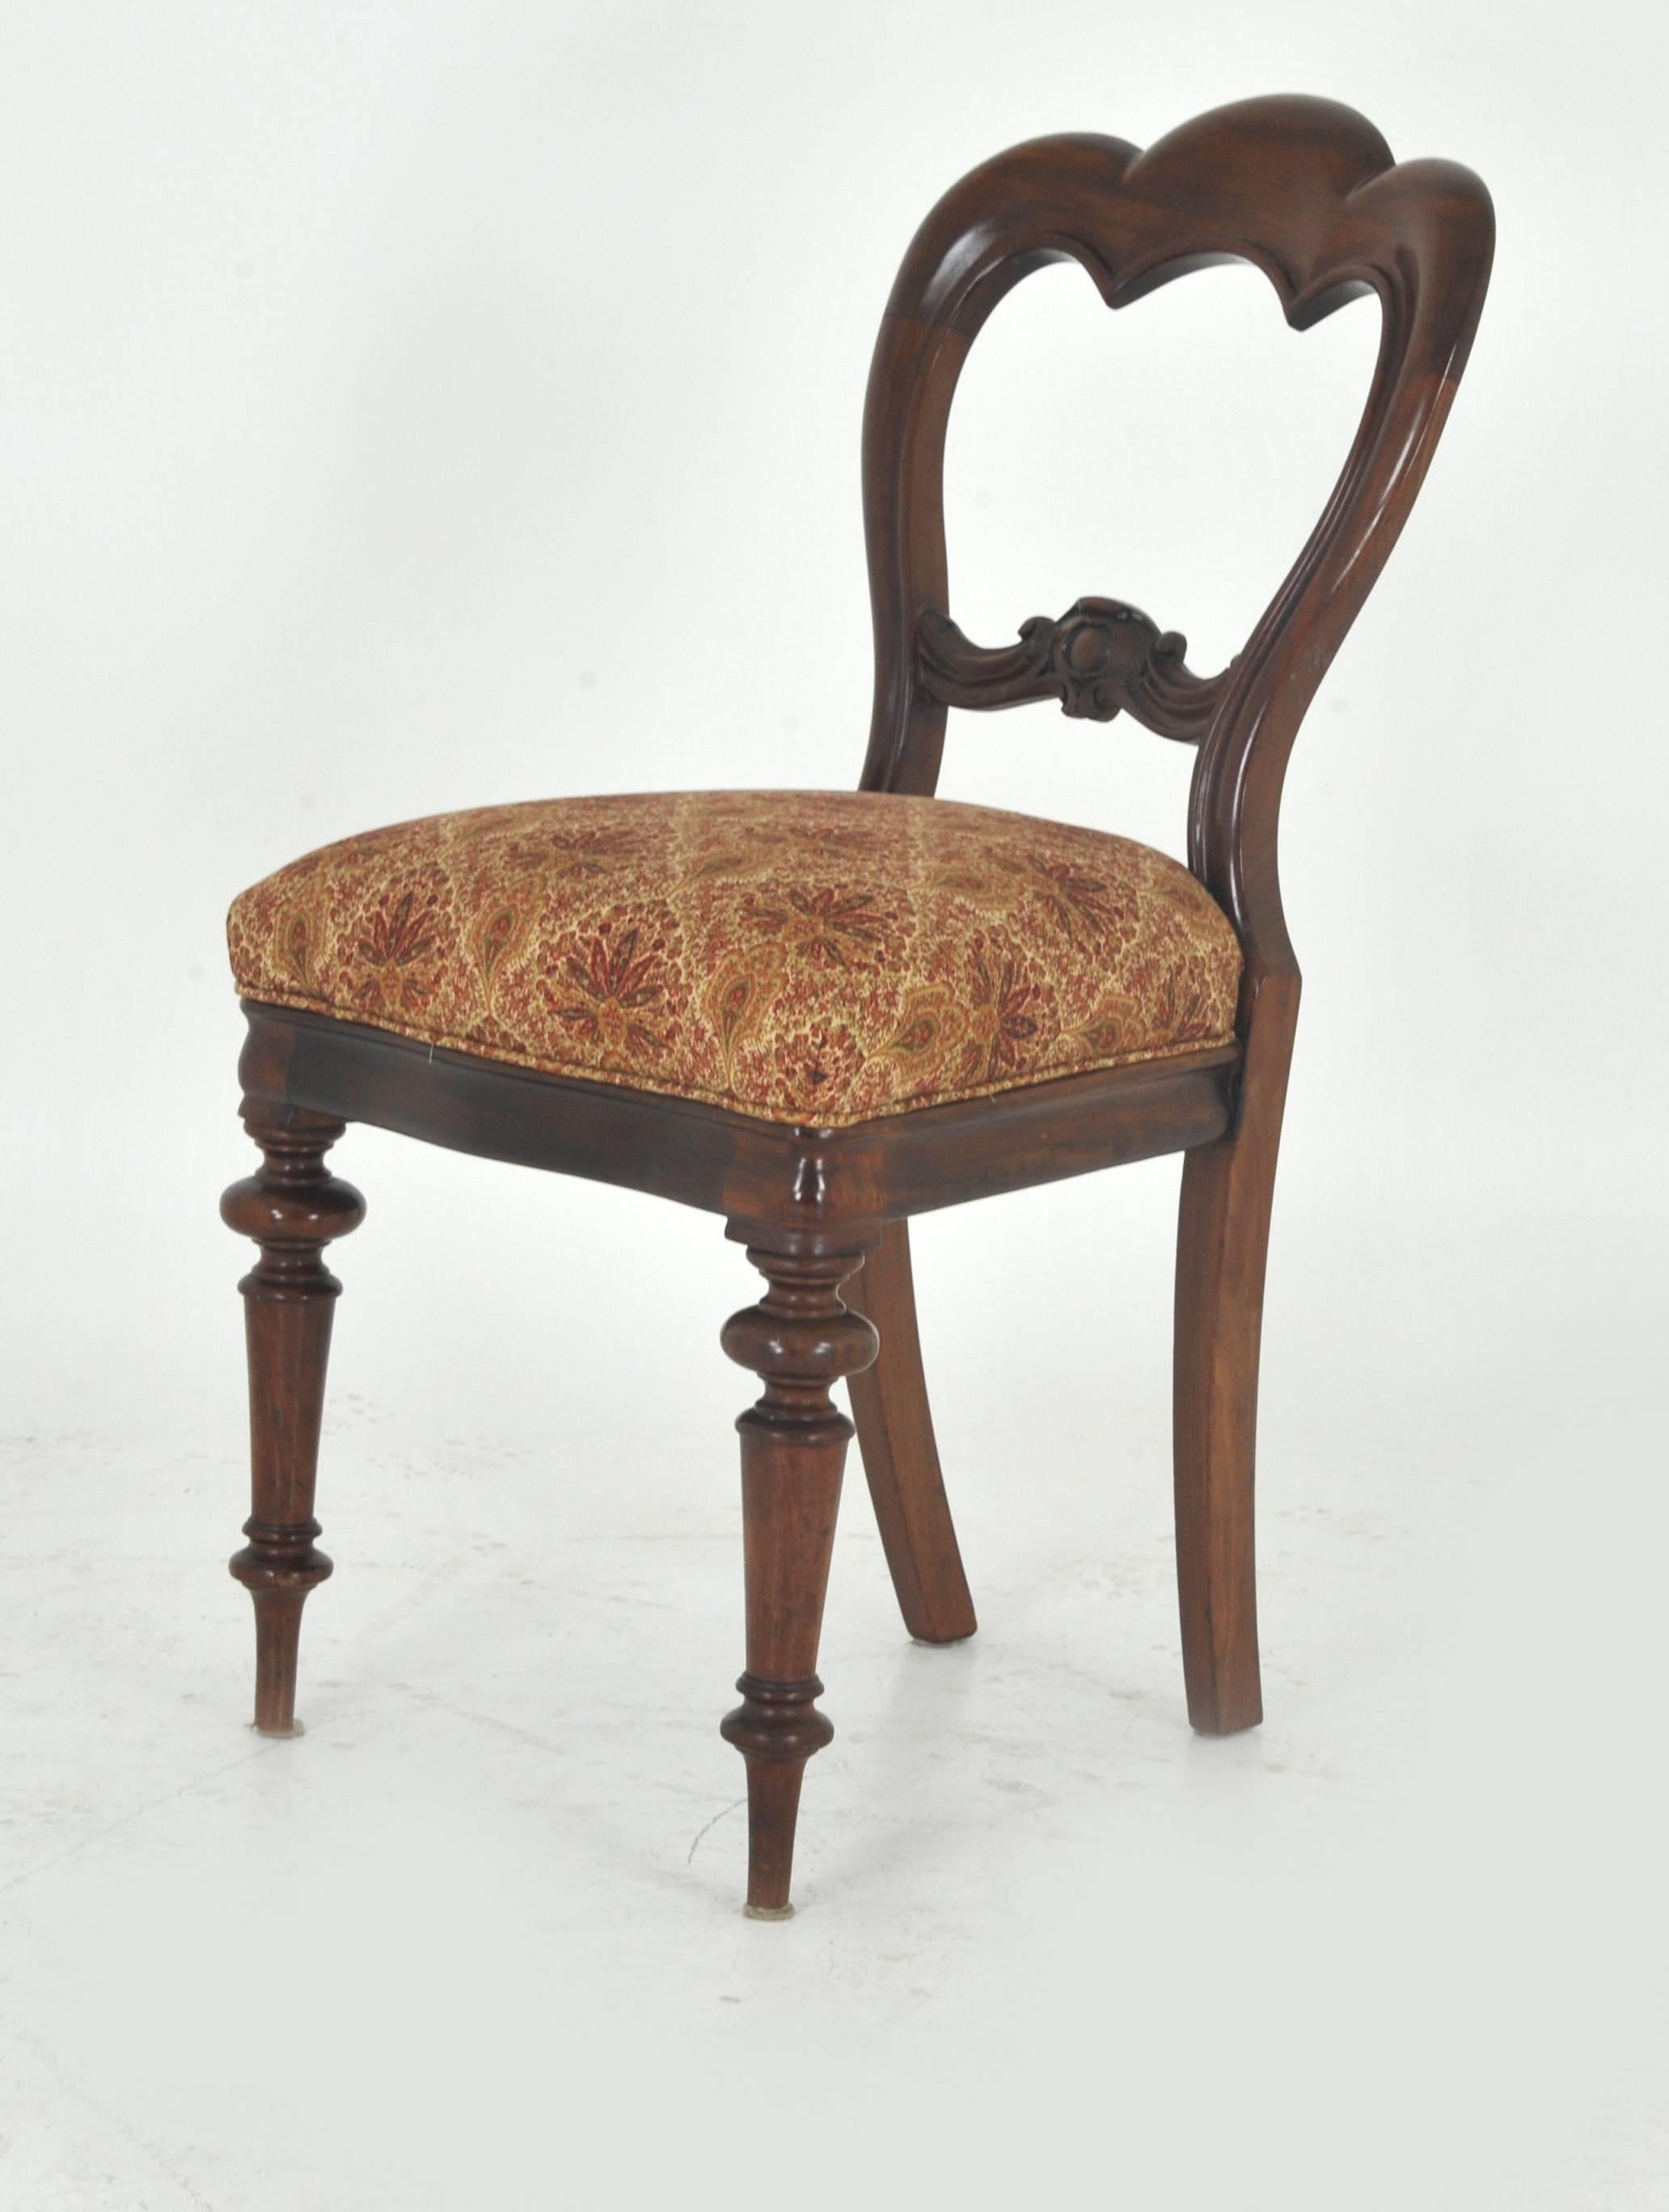 Antique Dining Chairs, Victorian, Balloon Back, Walnut, Set of Six, Scotland 1860, B830

Scotland, 1860
Solid walnut with original finish
Fan back has a carved lower rail
Padded lift out seat
Standing on turned fluted legs to the front, out swept